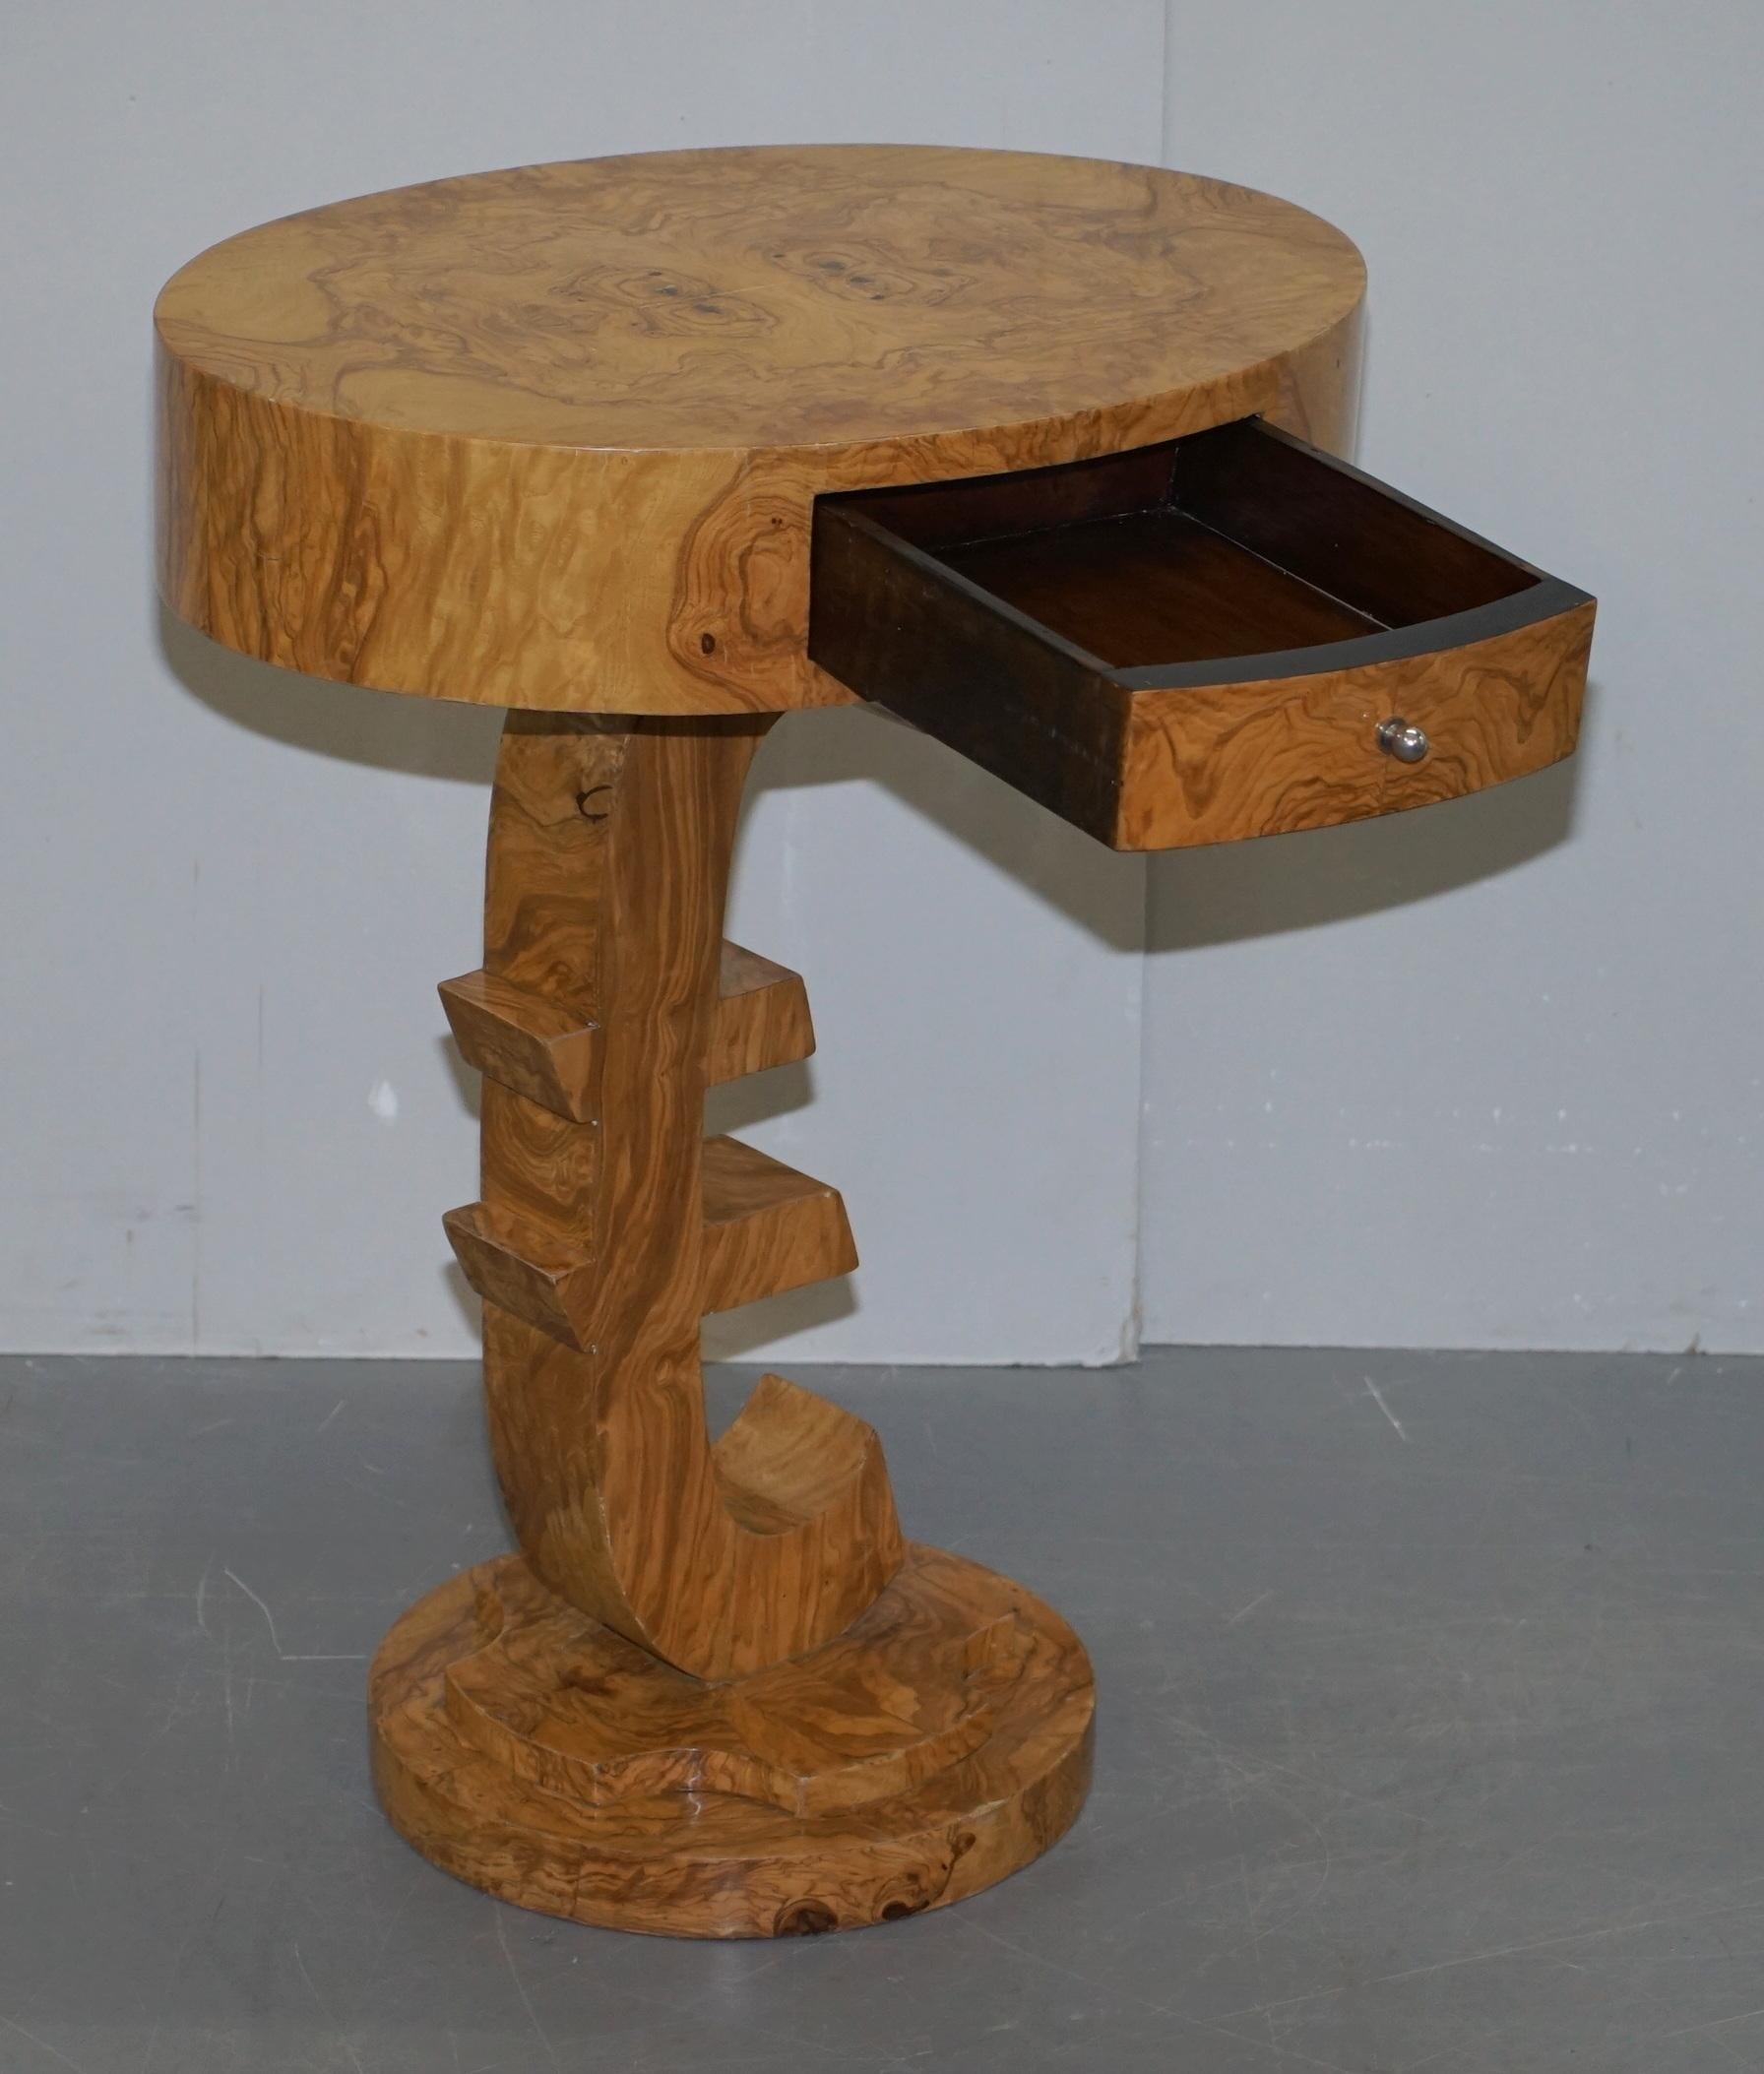 Lovely Art Deco Style Burr Walnut Side End Lamp Table with Euro Sign Base For Sale 10